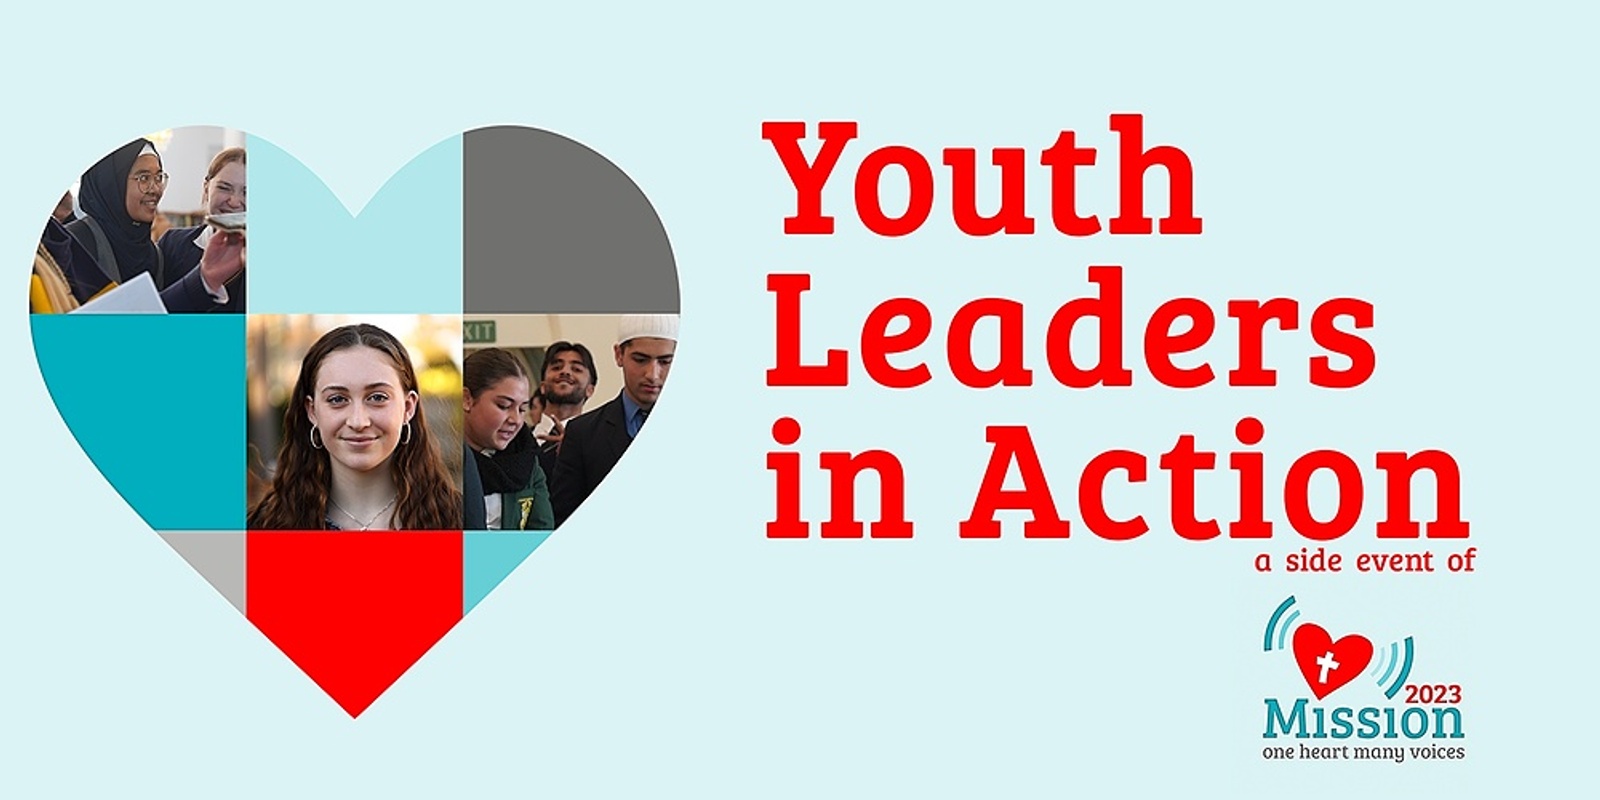 Banner image for Youth Leaders in Action – Side Event to the Mission: one heart many voices conference 